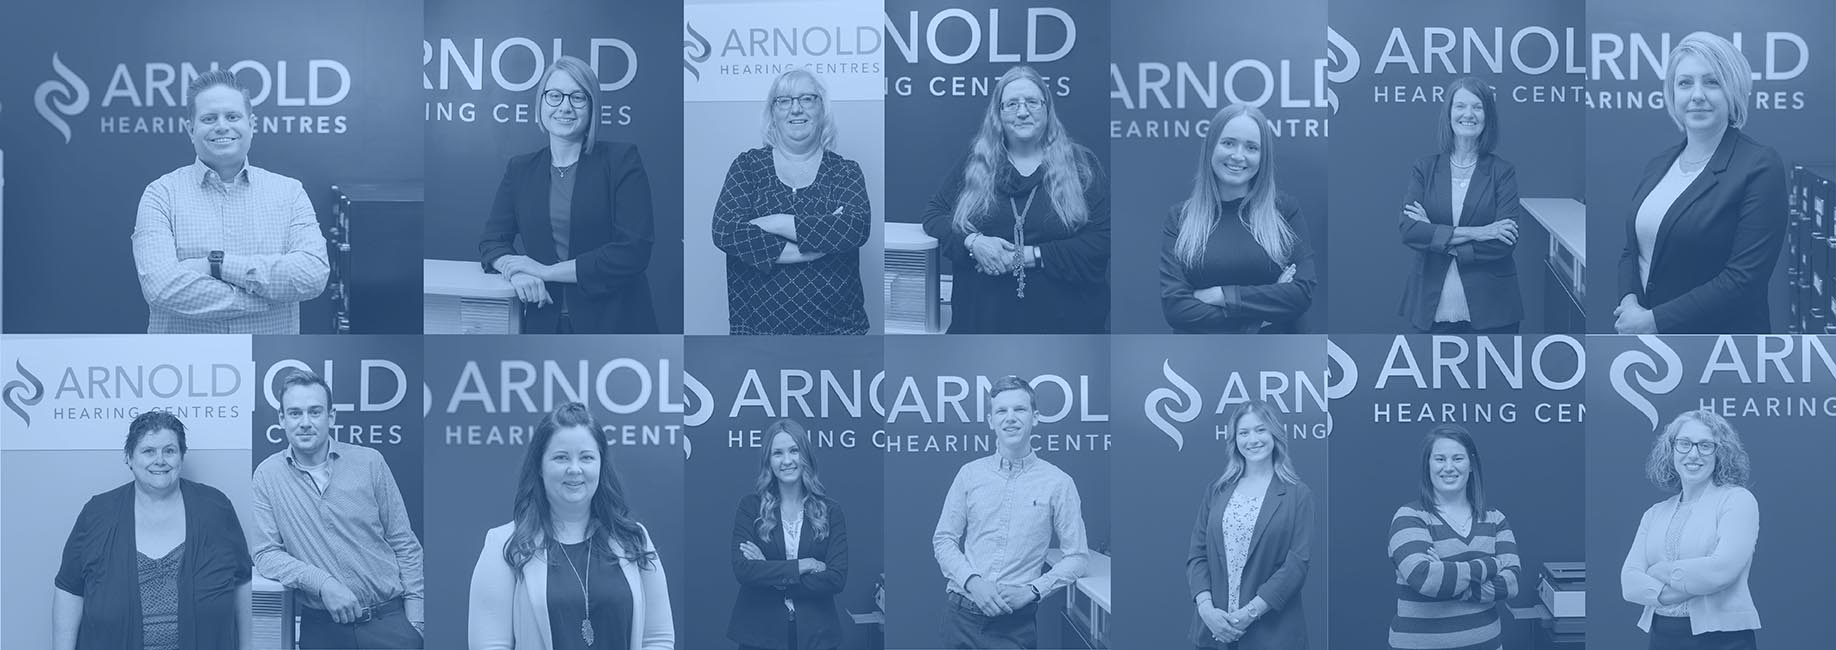 Arnold Hearing Centres' hearing experts and care family collage